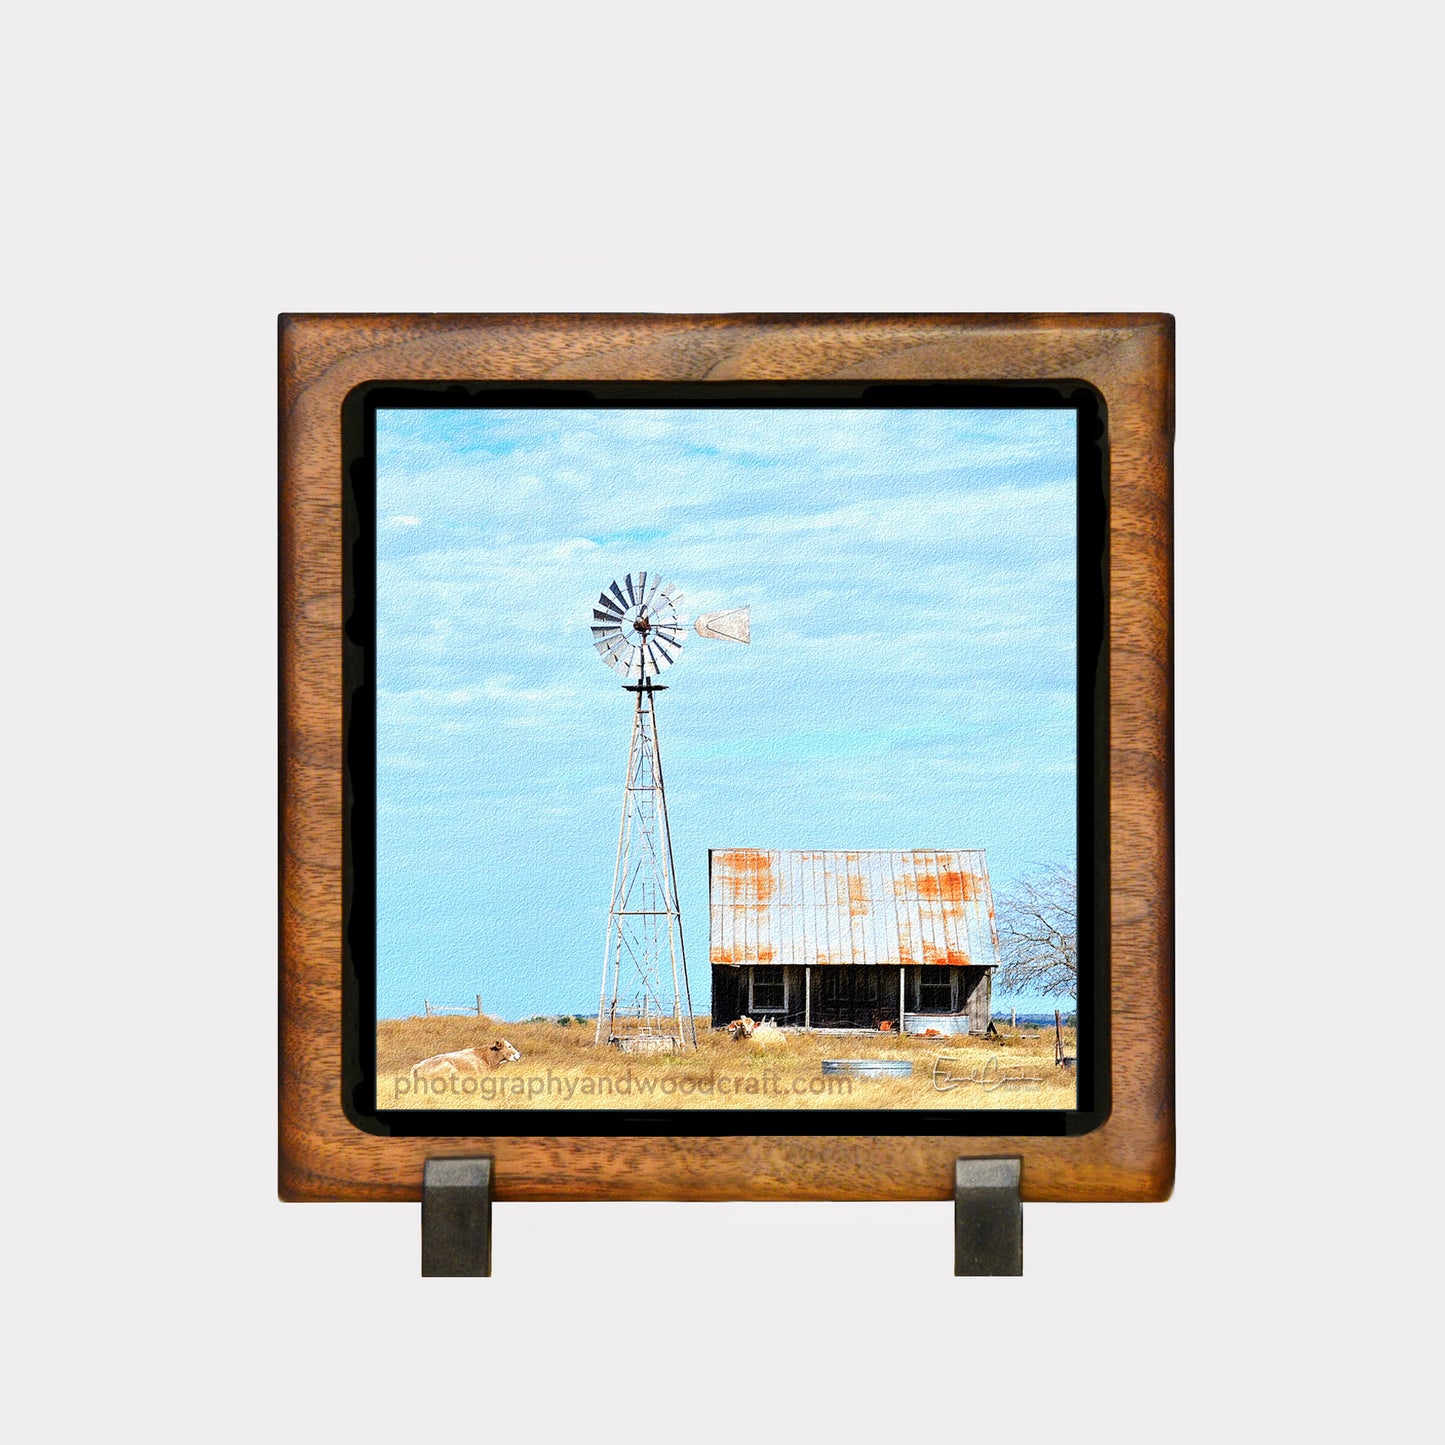 5" x 5" Homestead. Canvas Print in Solid Wood Floating Frame